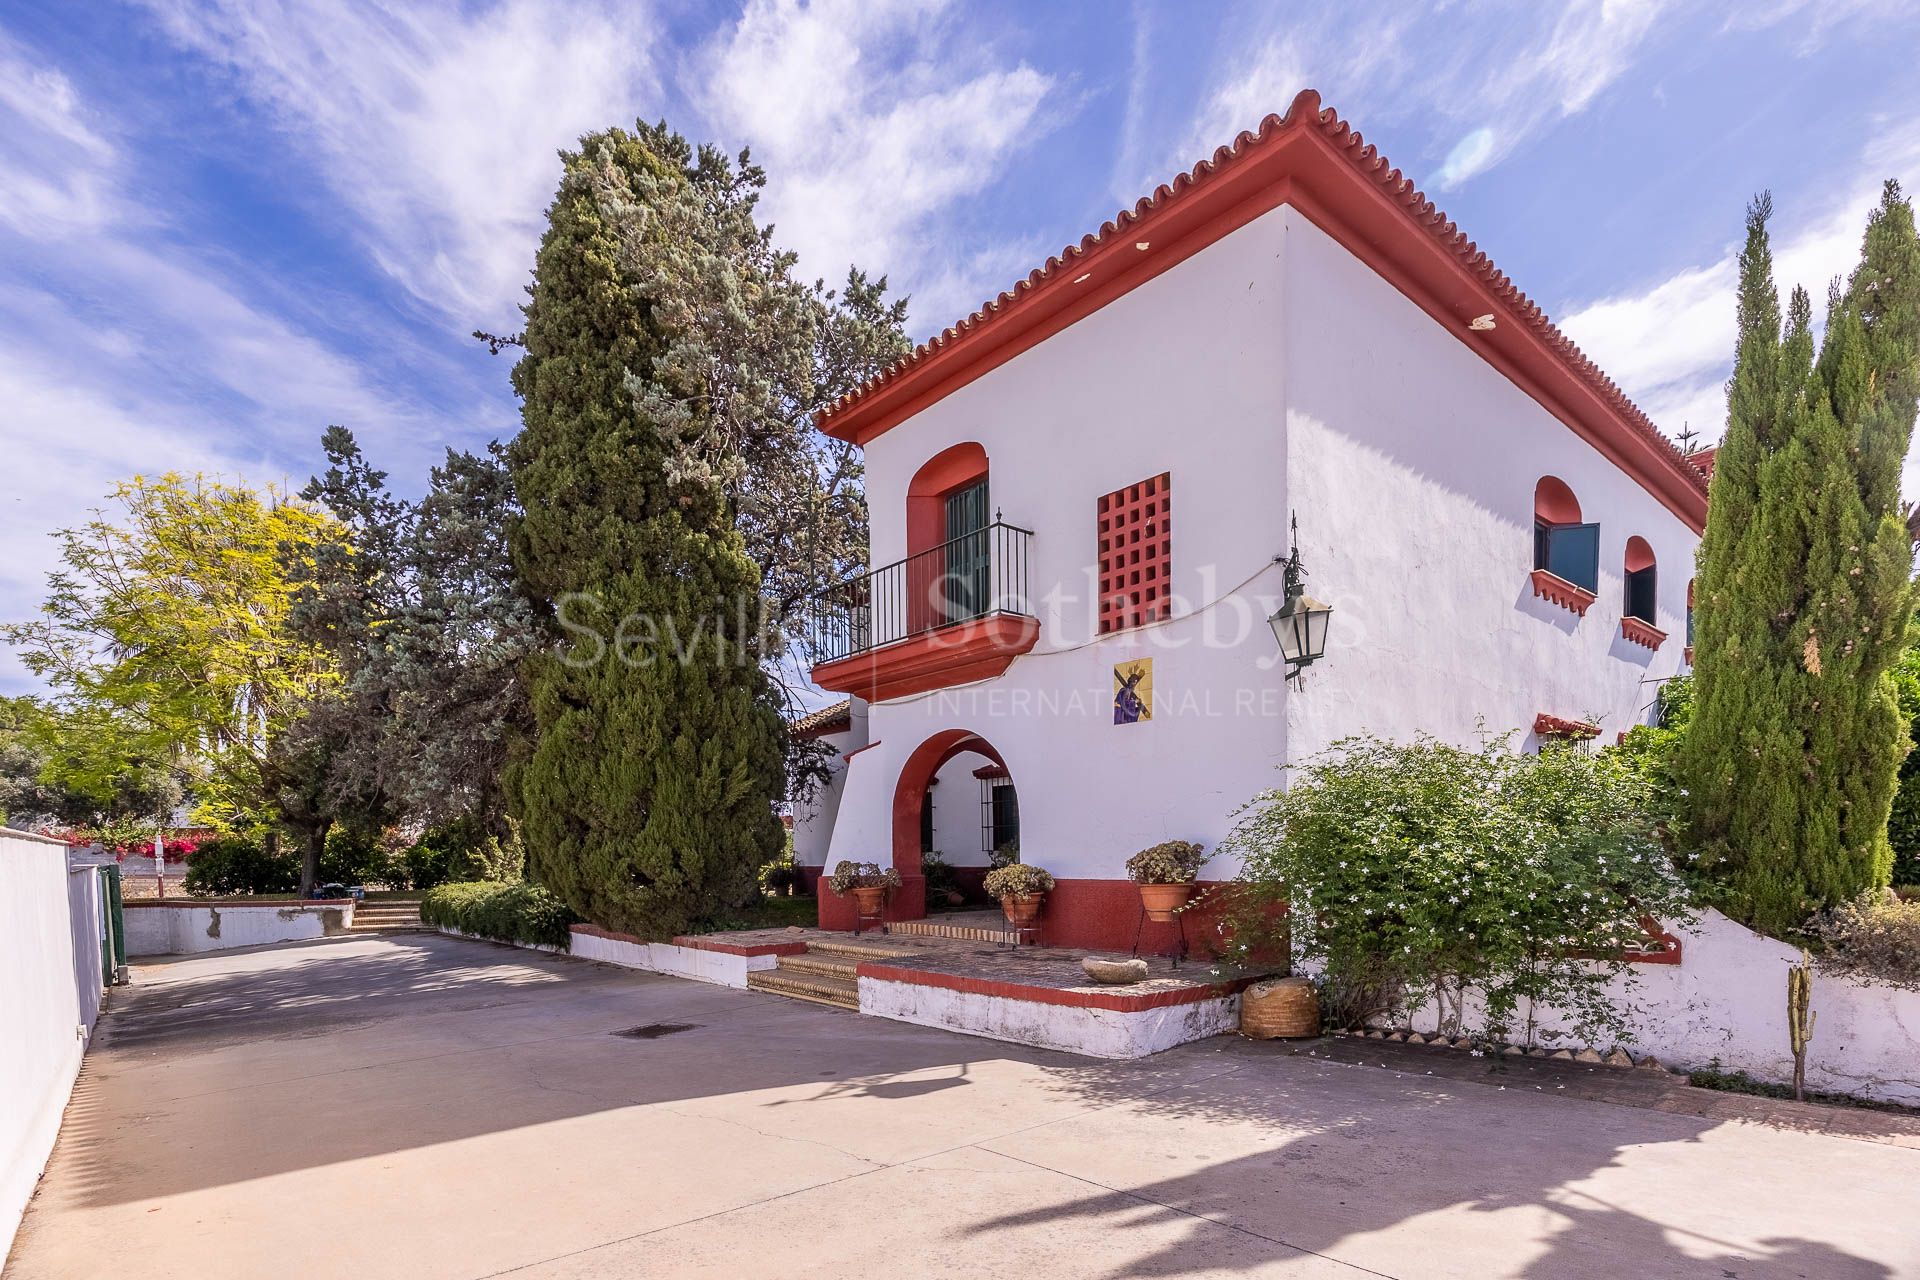 Detached villa in Gines, located on a plot of 3171.52 m² with 796 m² built